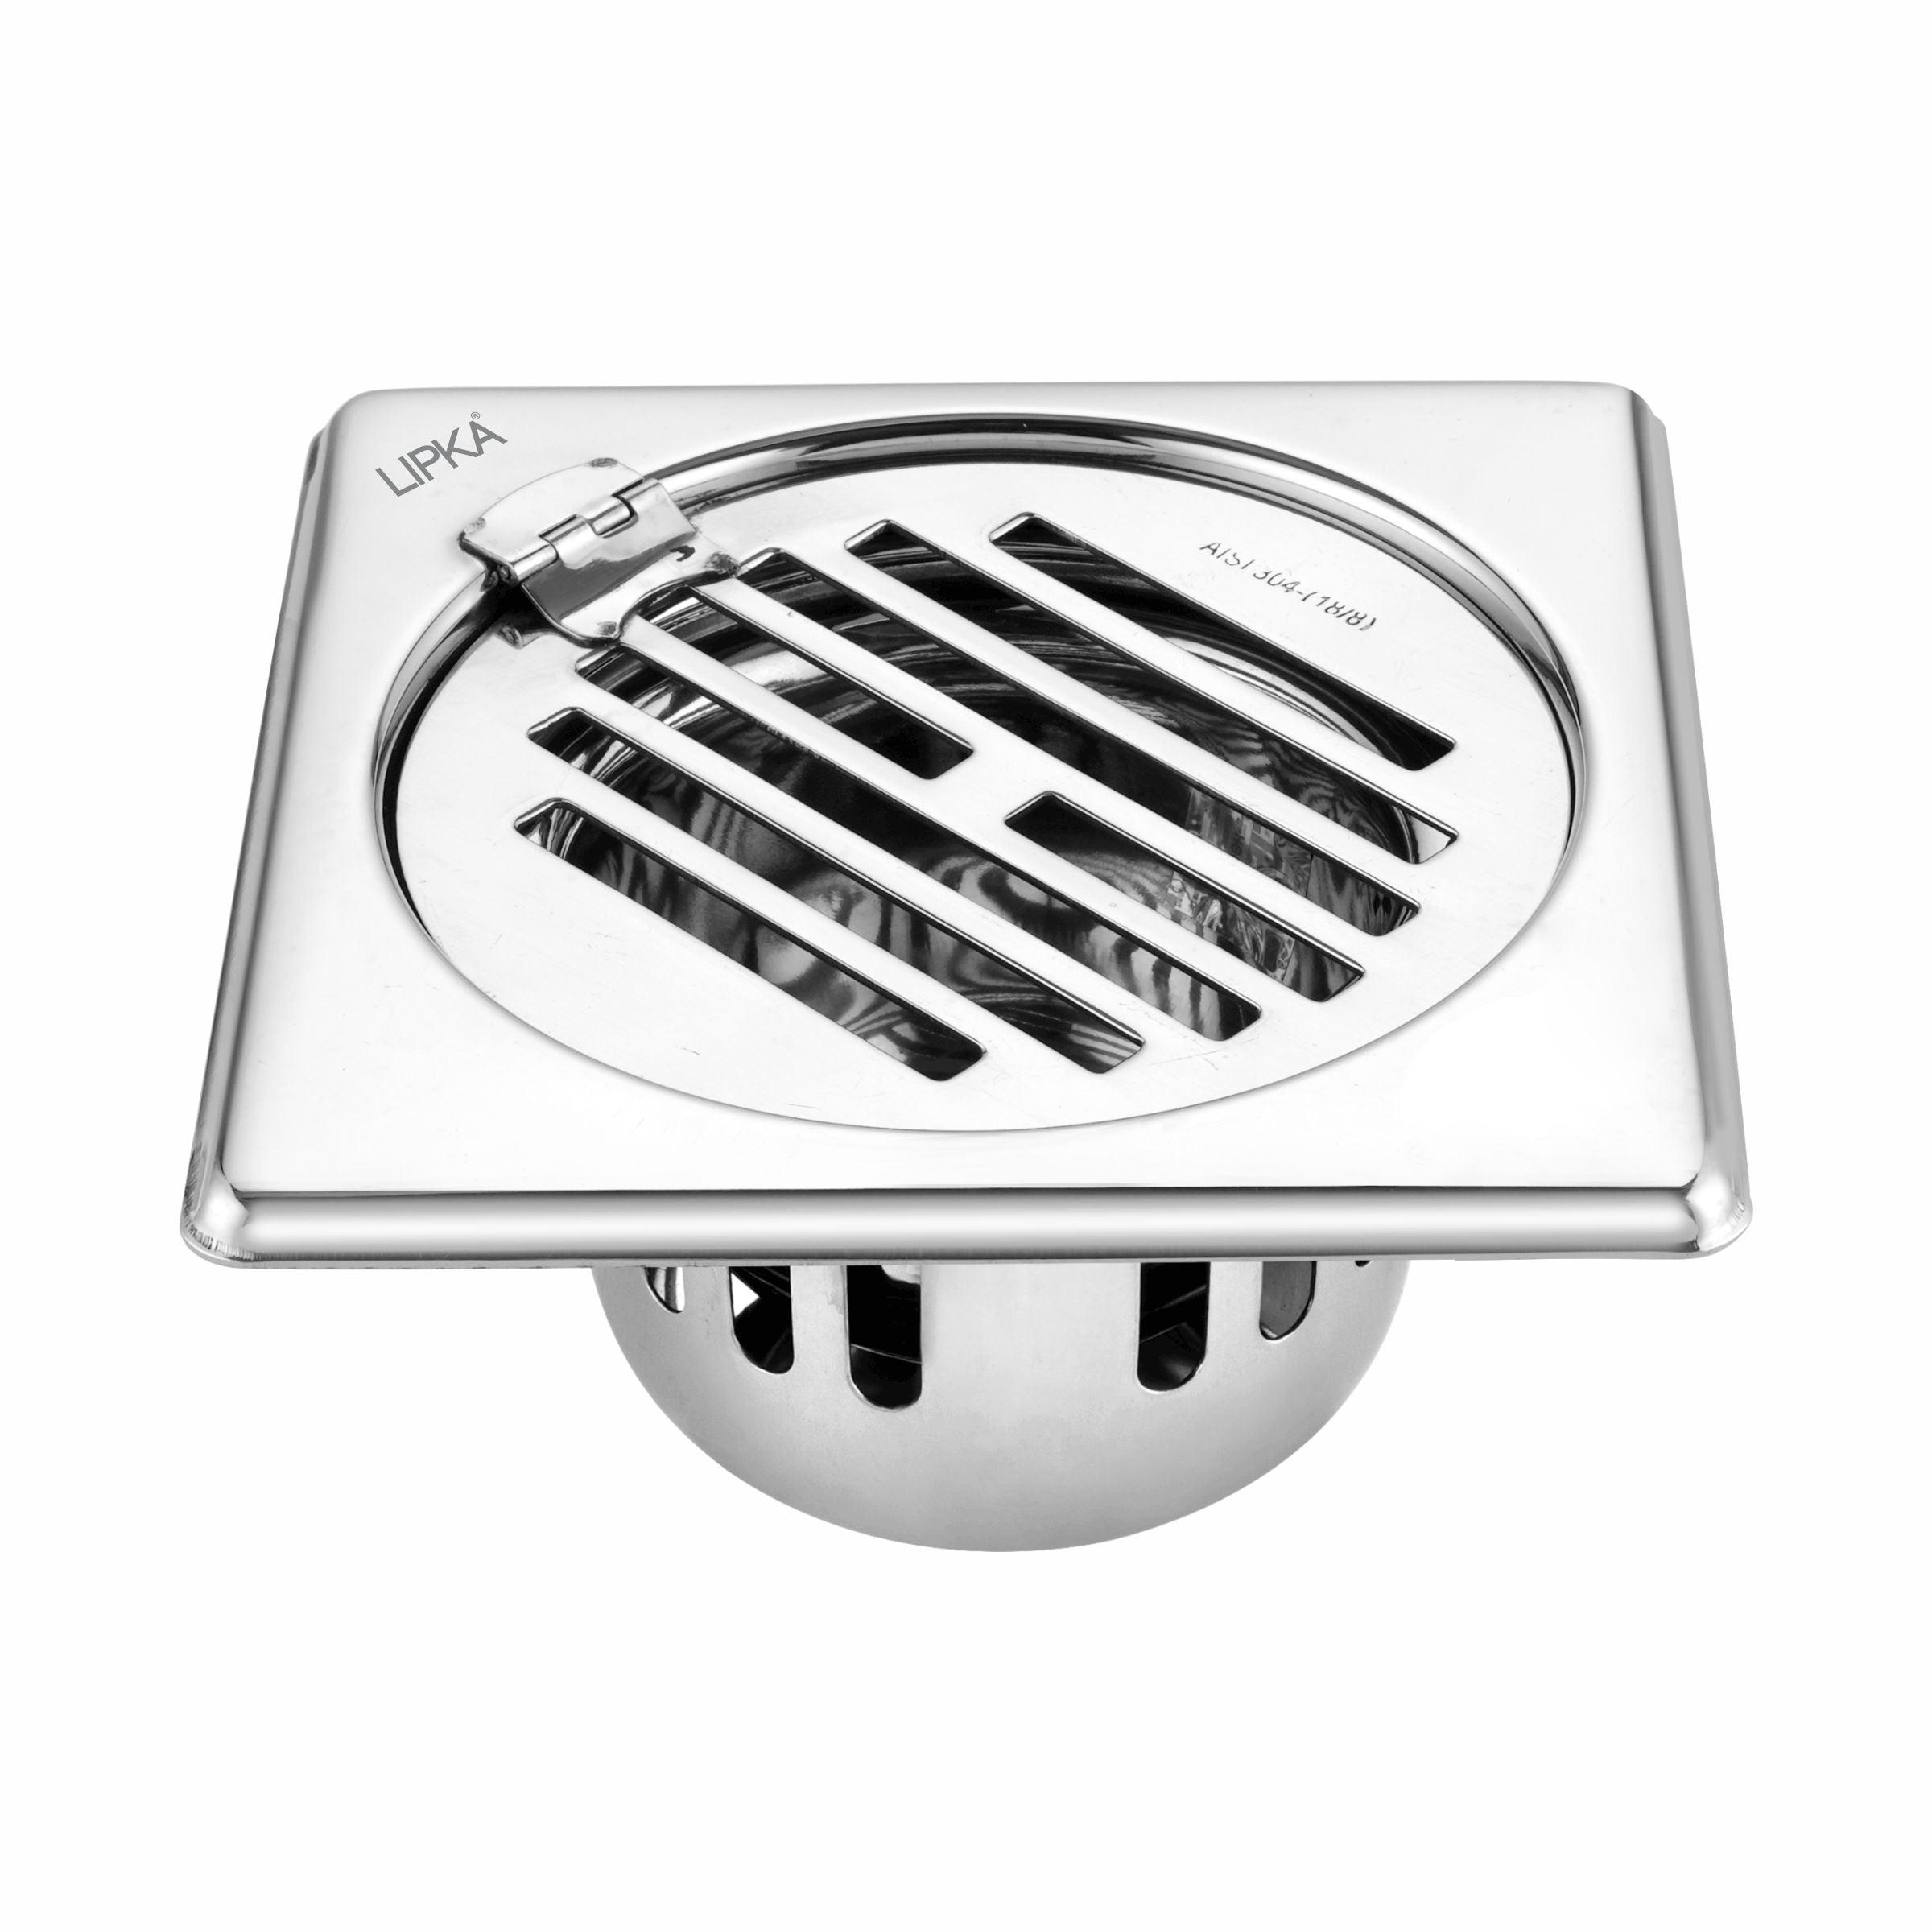 Golden Classic Jali Square Floor Drain (5 x 5 Inches) with Hinge and Cockroach Trap - LIPKA - Lipka Home